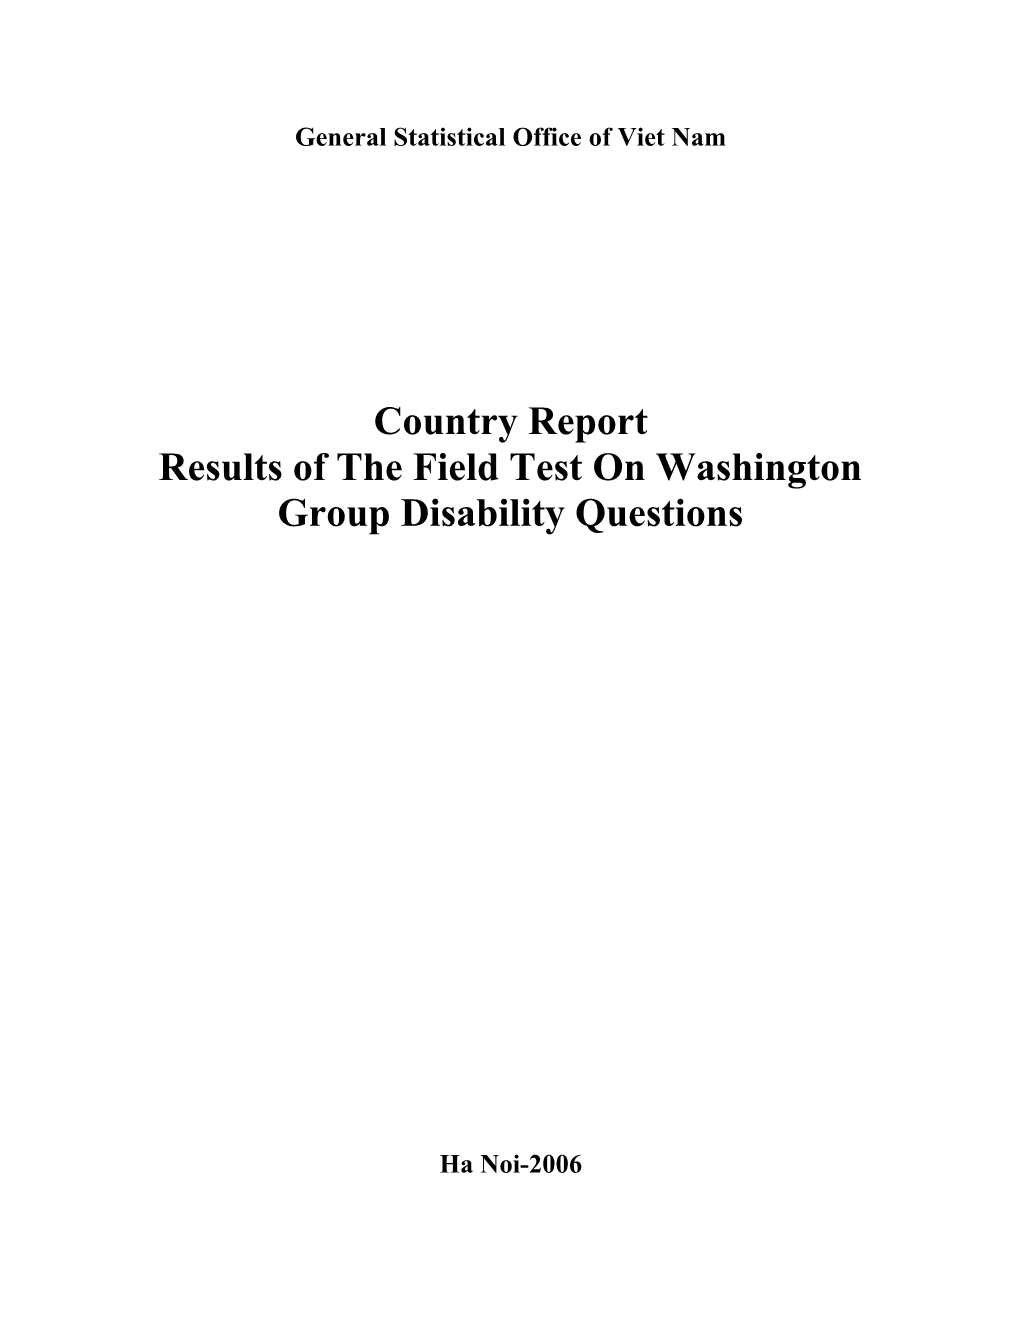 Cognitive Testing Report Outline